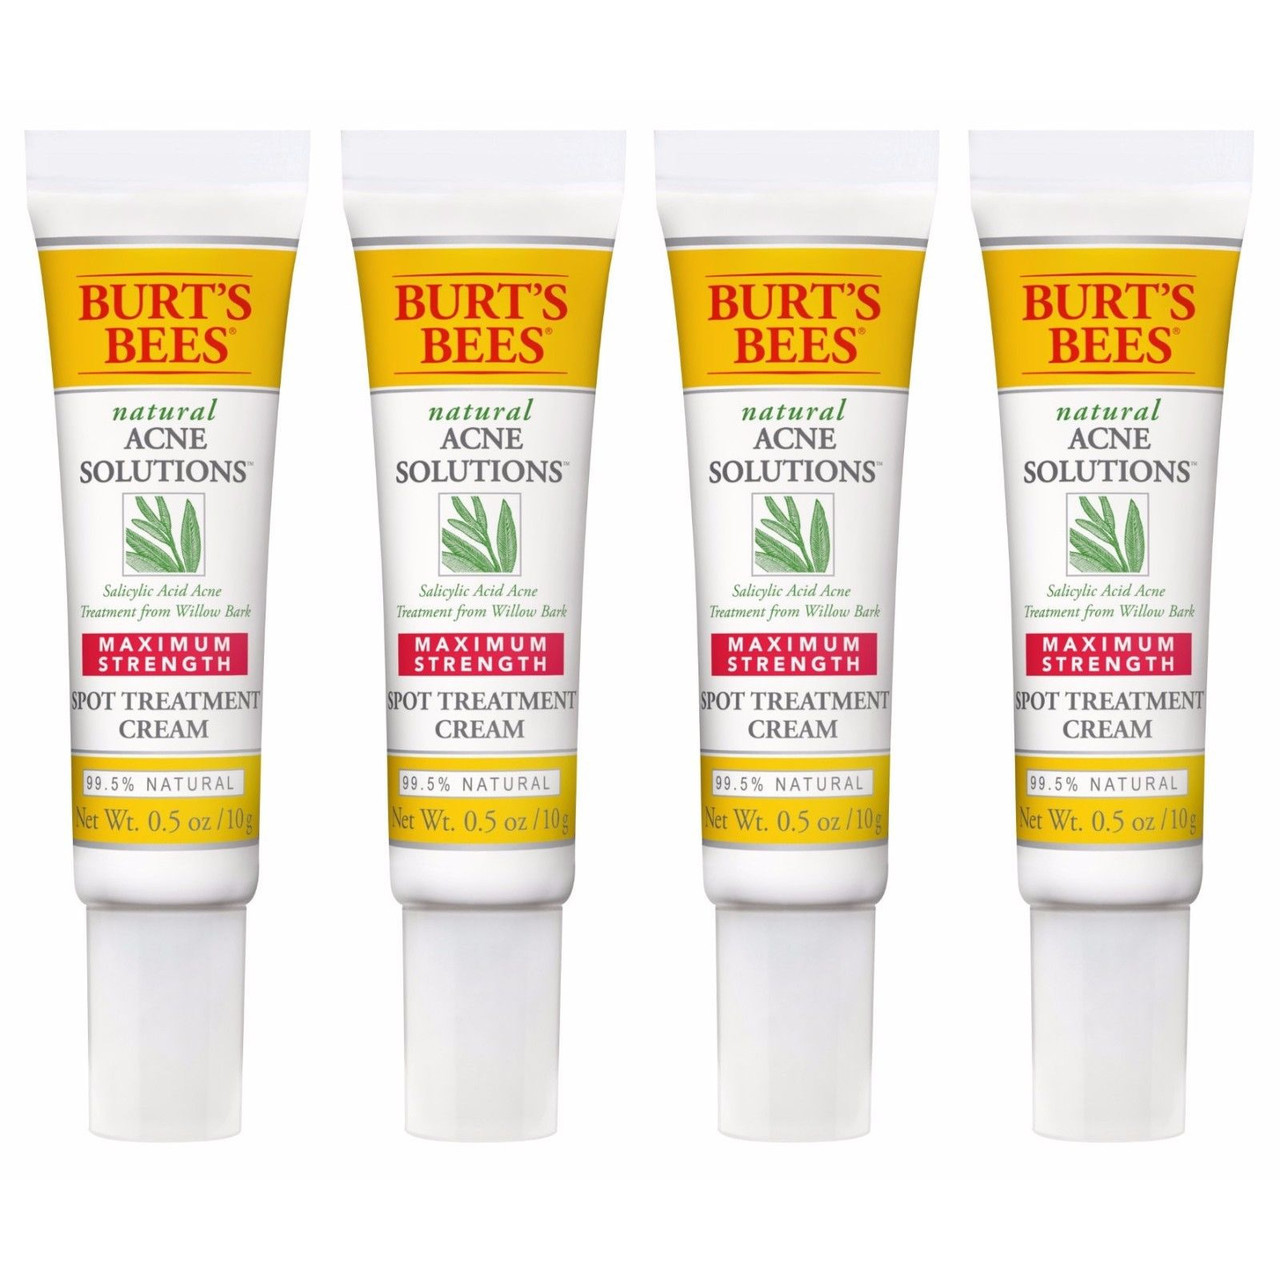 Burt’s Bees Acne Spot Treatment Cream 4-Pack ONLY $9.99 Shipped!